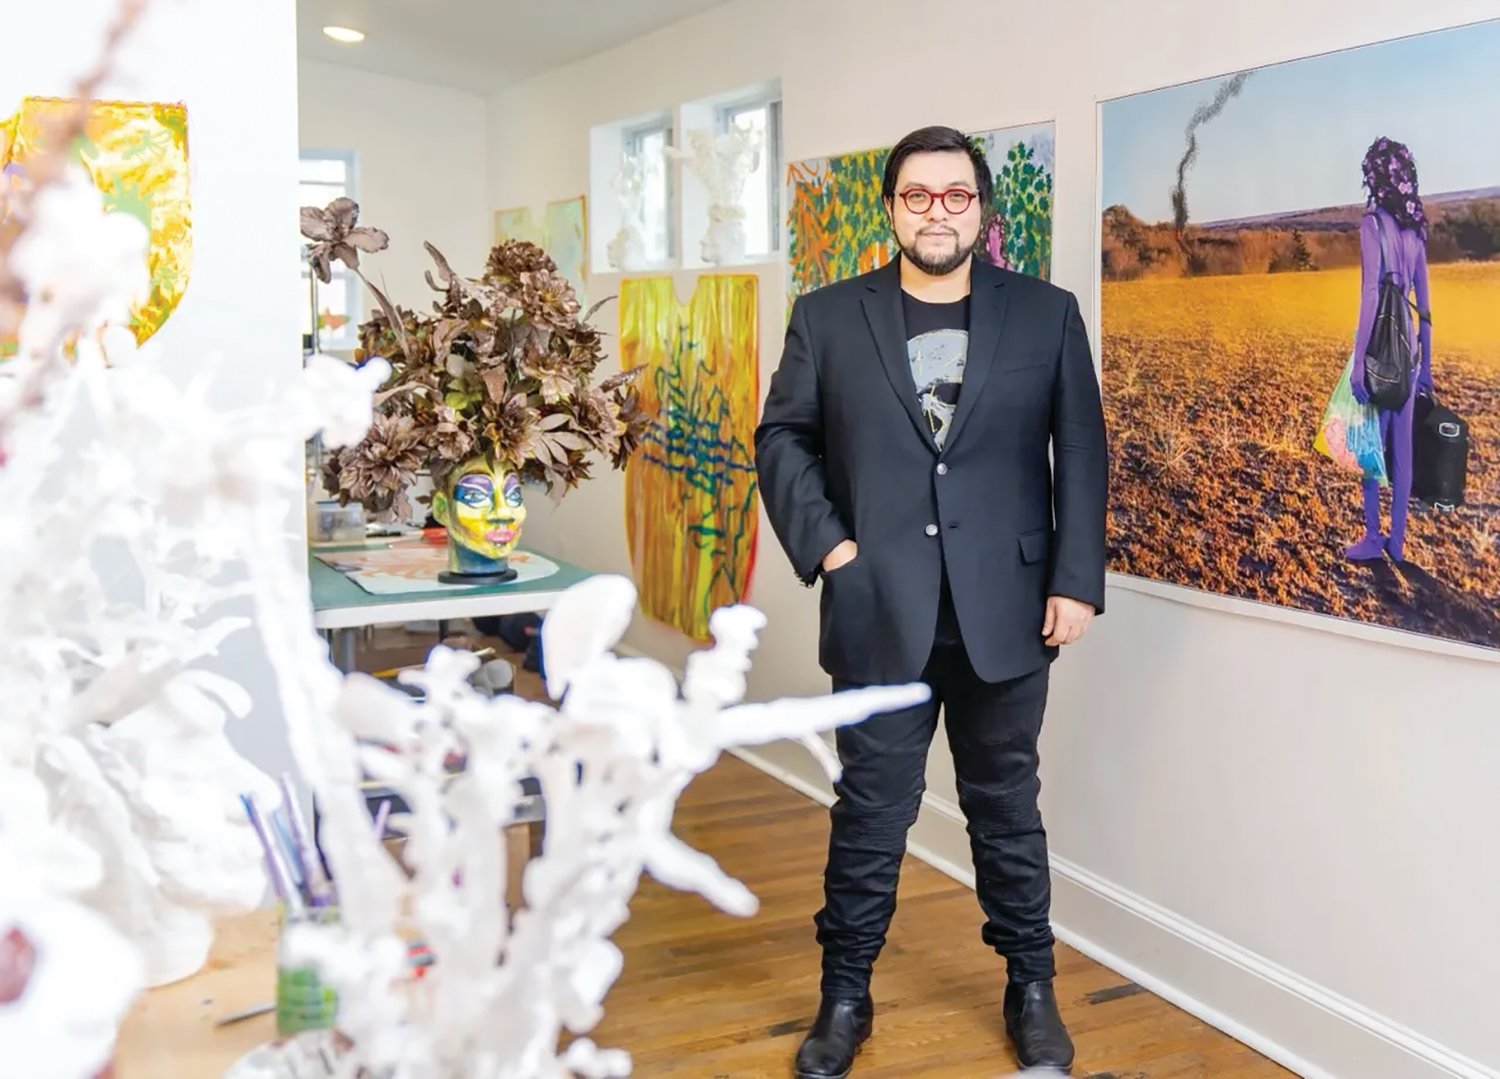 Hoesy Corona wil serve as artist-in-residence at Wabash College. He is expected to engage with the community through school visits and gallery tours.